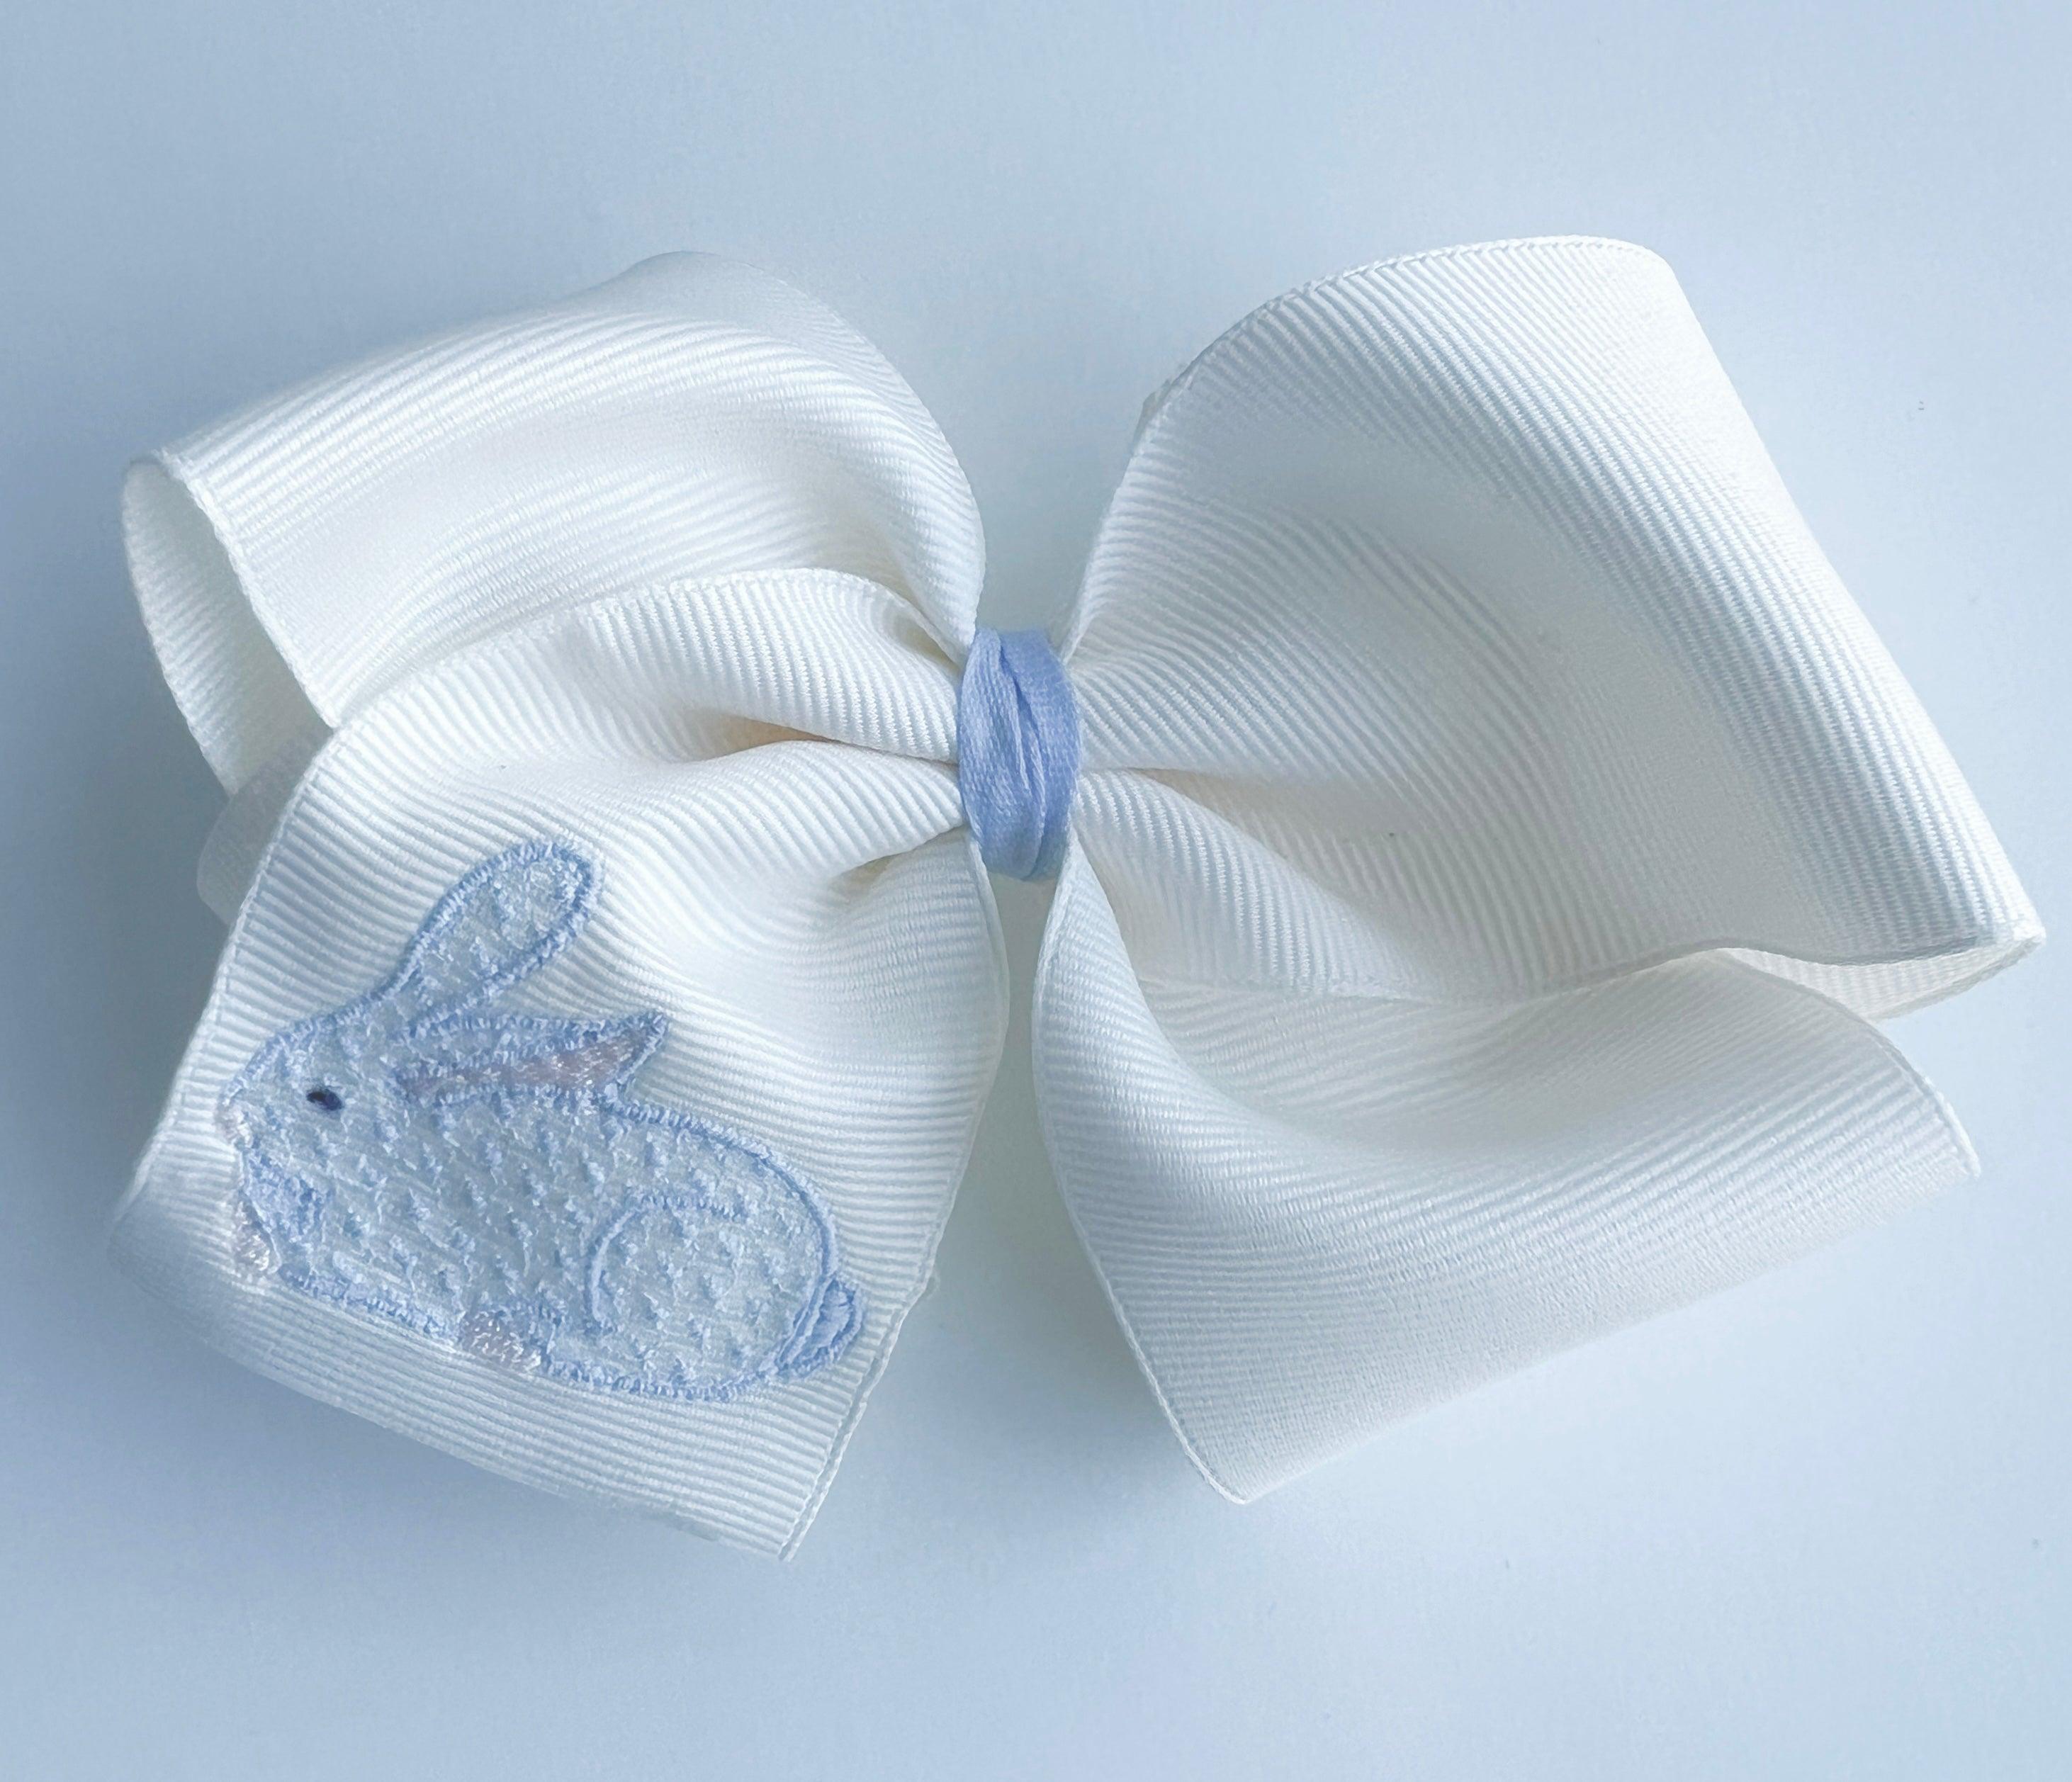 Gracie Bow - Porcelain Bunny | Nashville Bow Co. - Classic Hair Bows, Bow Ties, Basket Bows, Pacifier Clips, Wreath Sashes, Swaddle Bows. Classic Southern Charm.